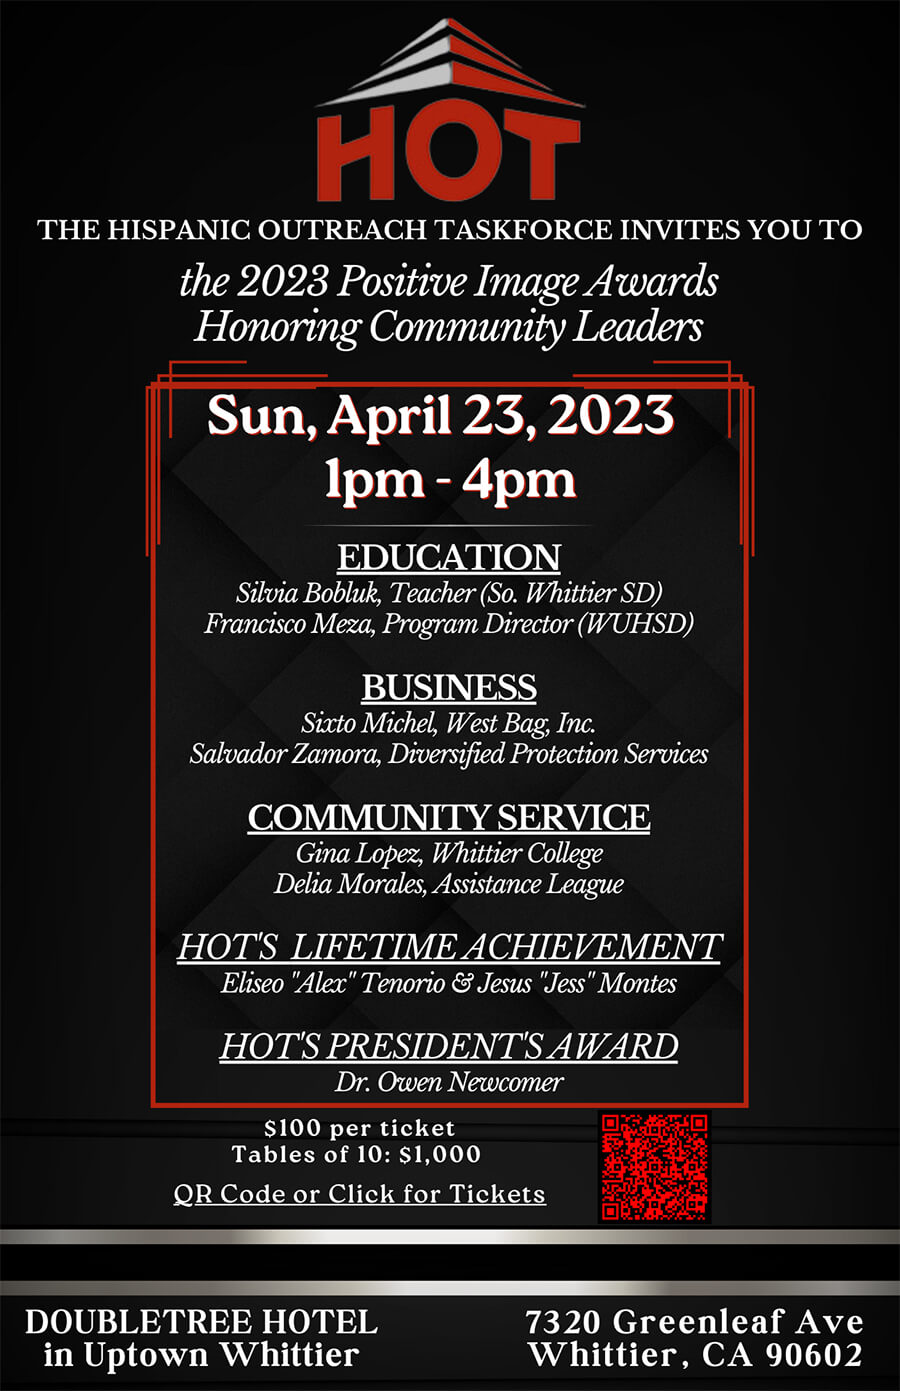 The Positive Image Awards